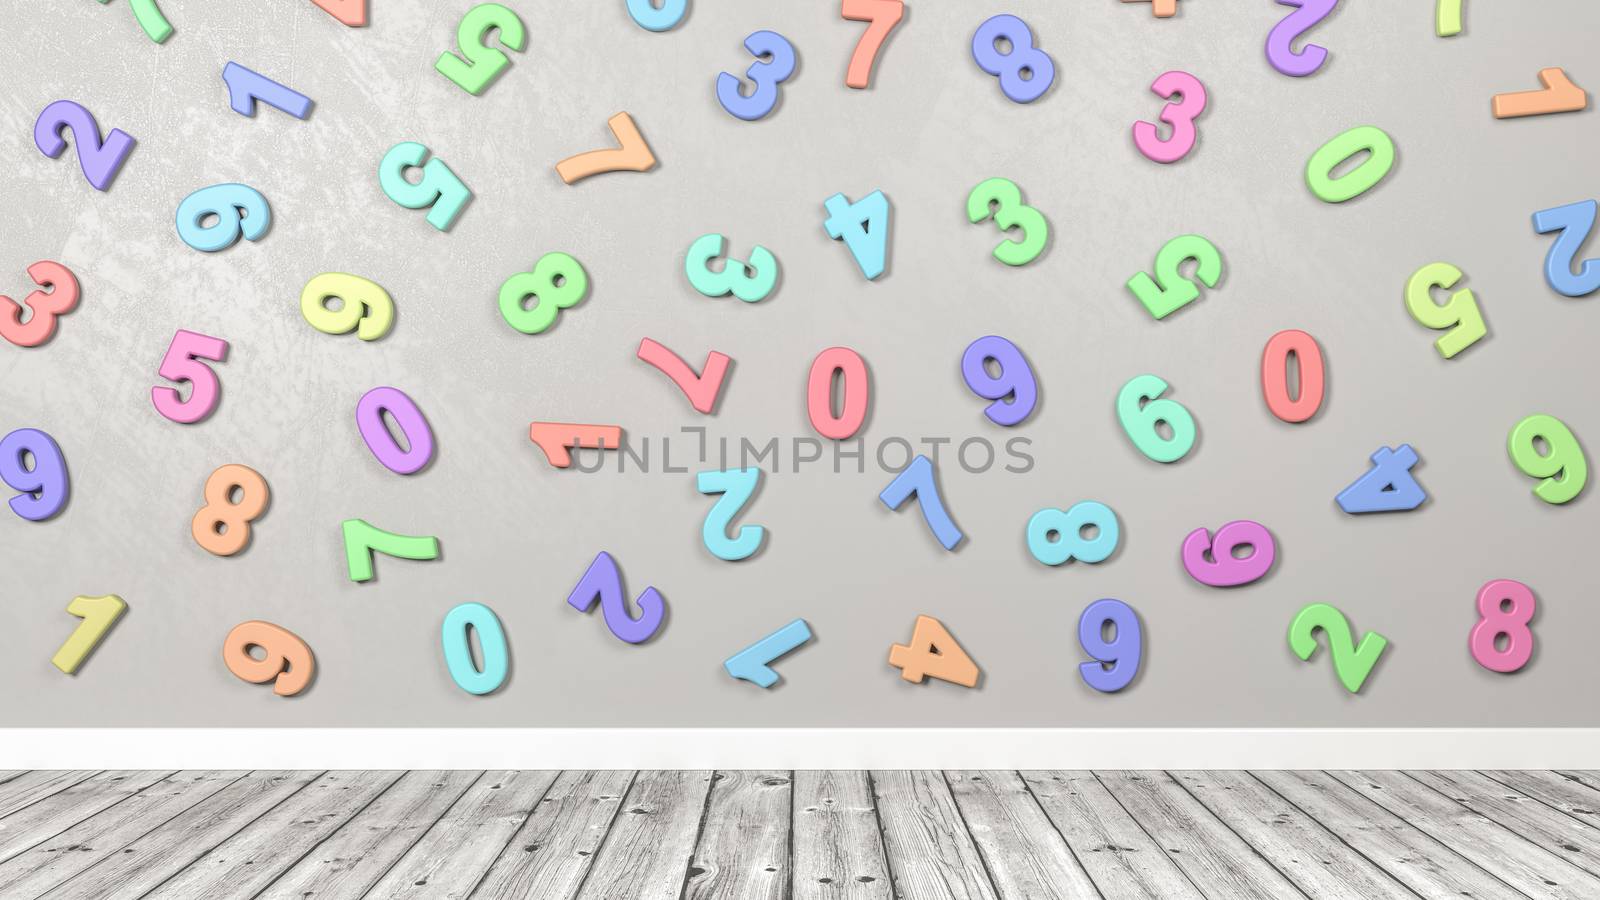 3D Colorful Numbers Against Wall in a Wooden Floor Room by make